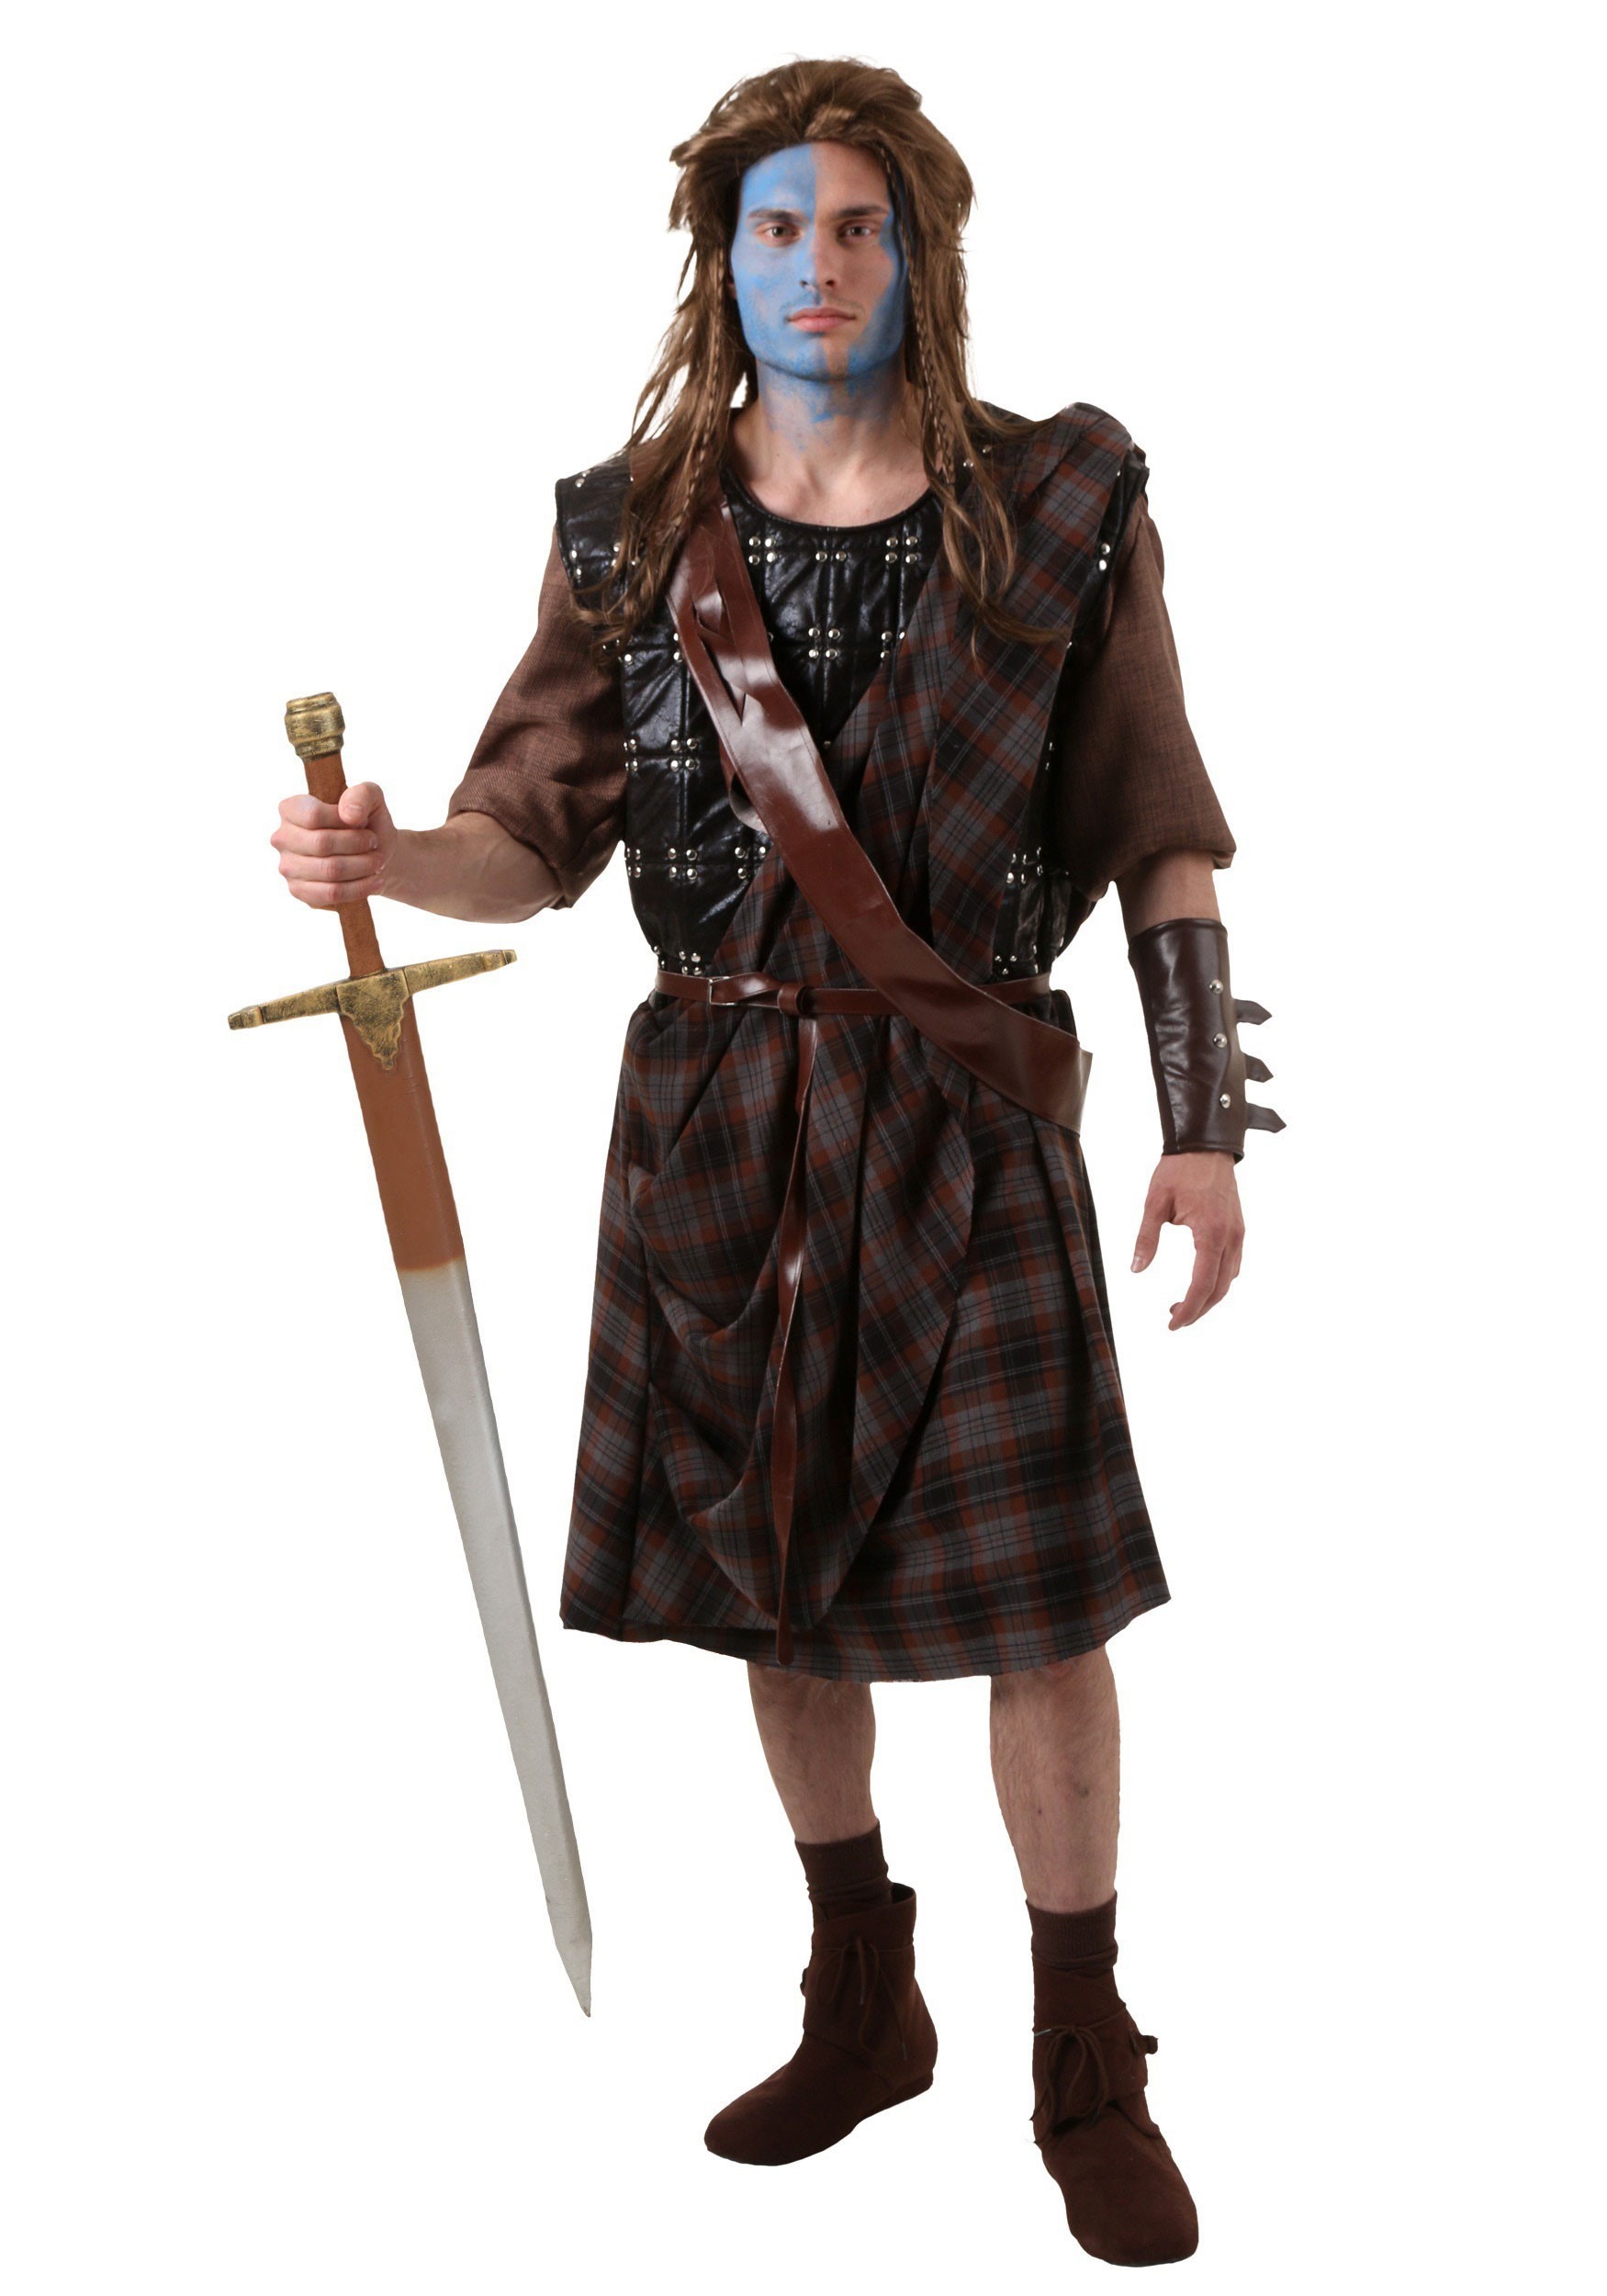 Image of FUN Costumes Adult Braveheart William Wallace Costume